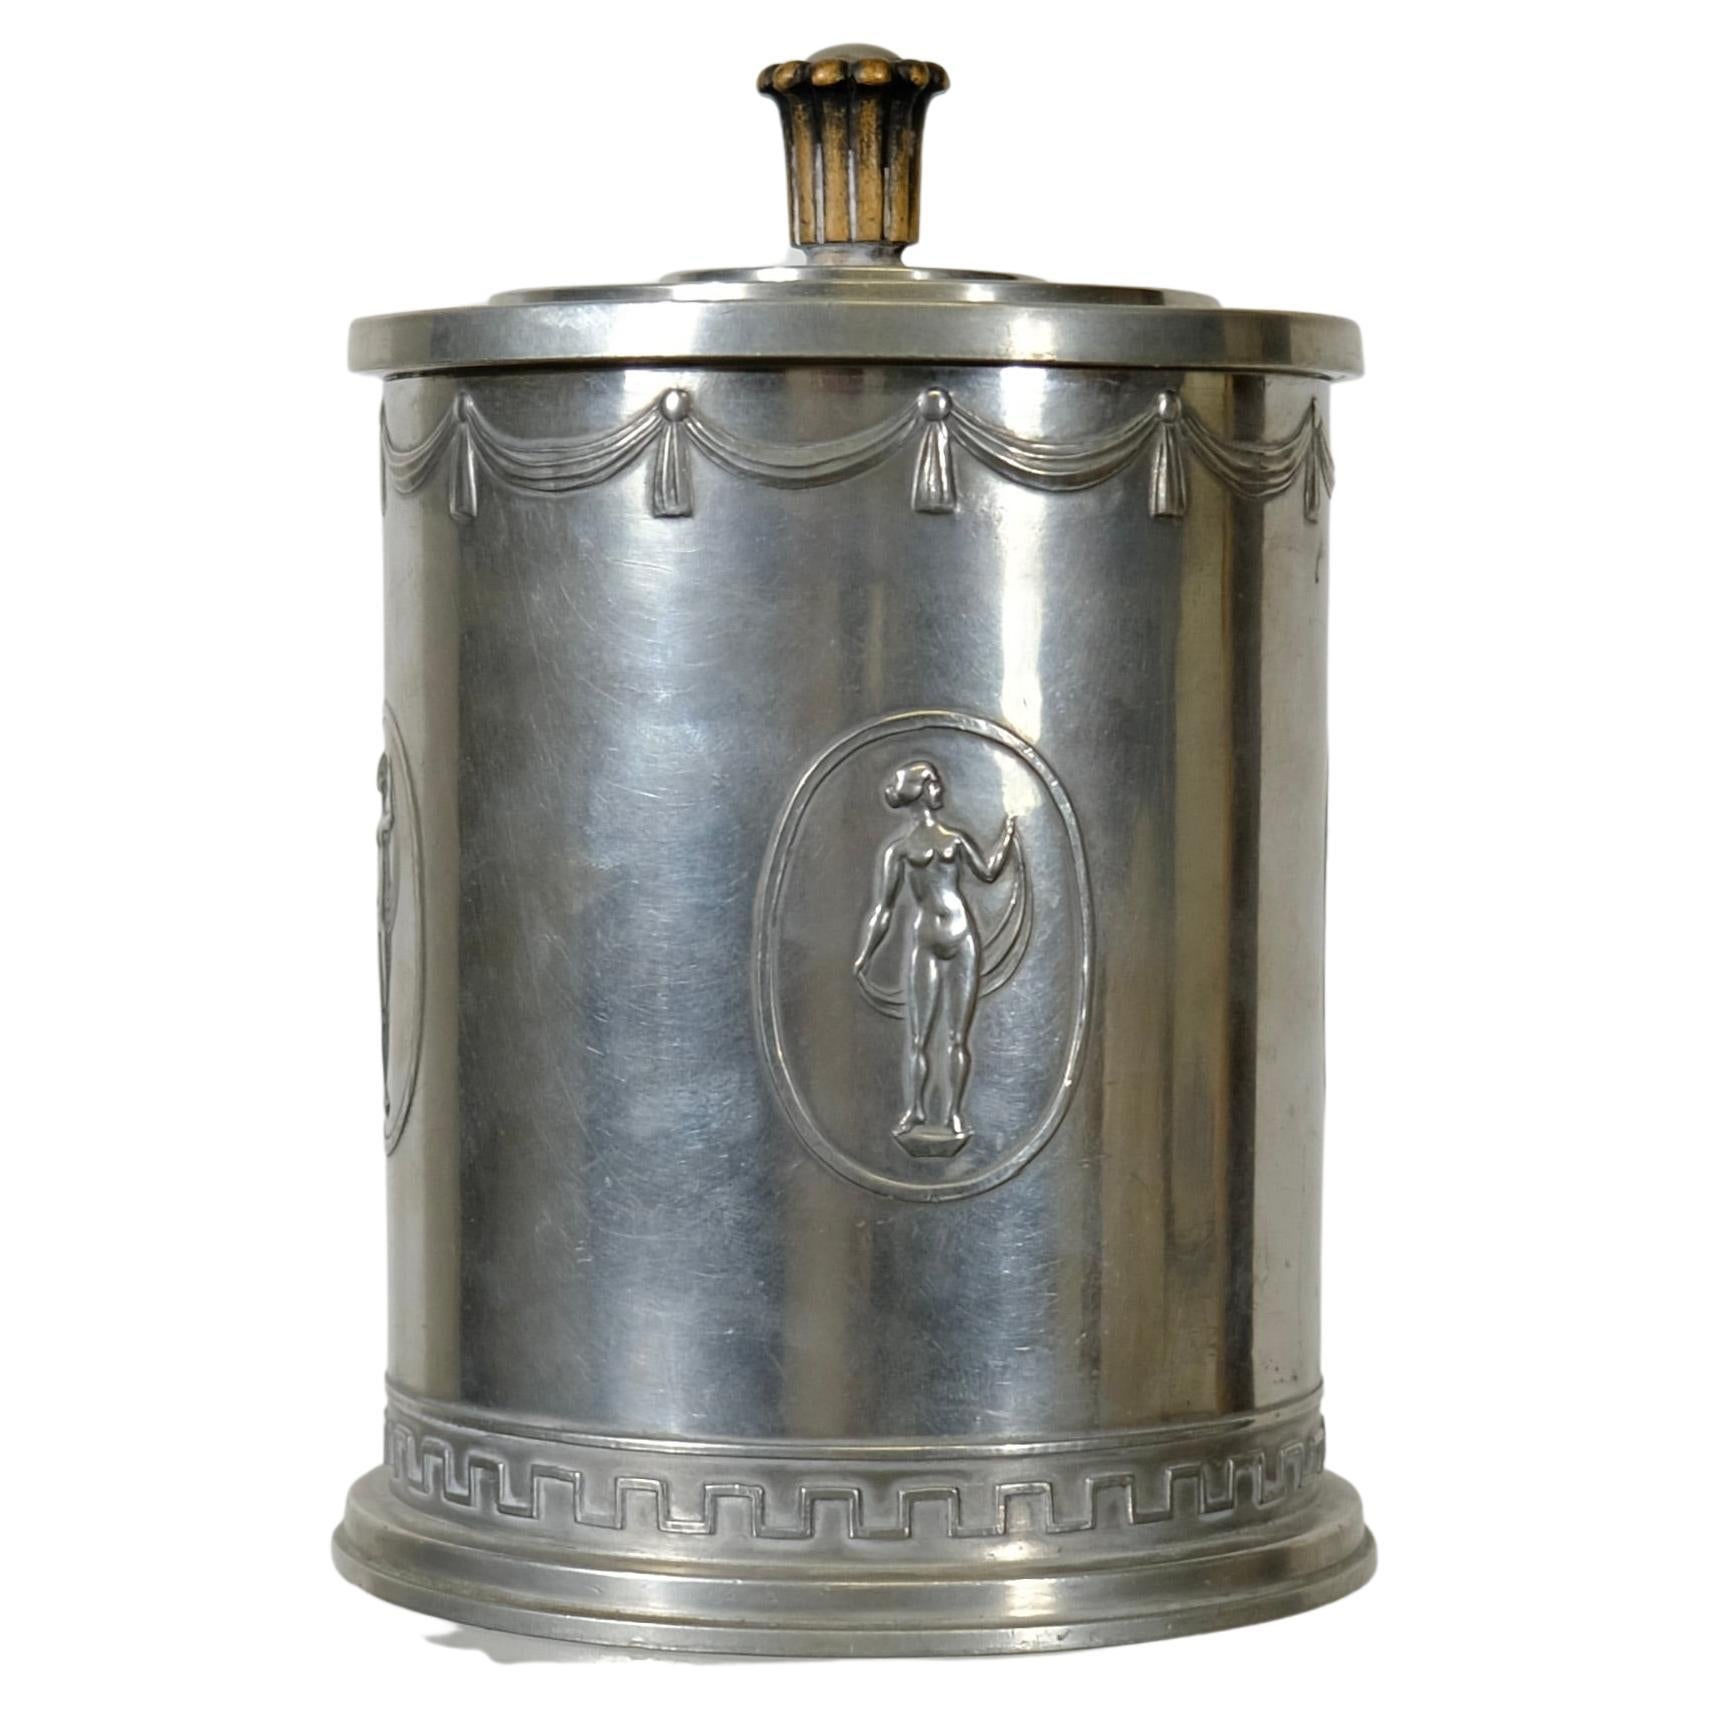 Swedish Grace Pewter jar with lid made in 1927.